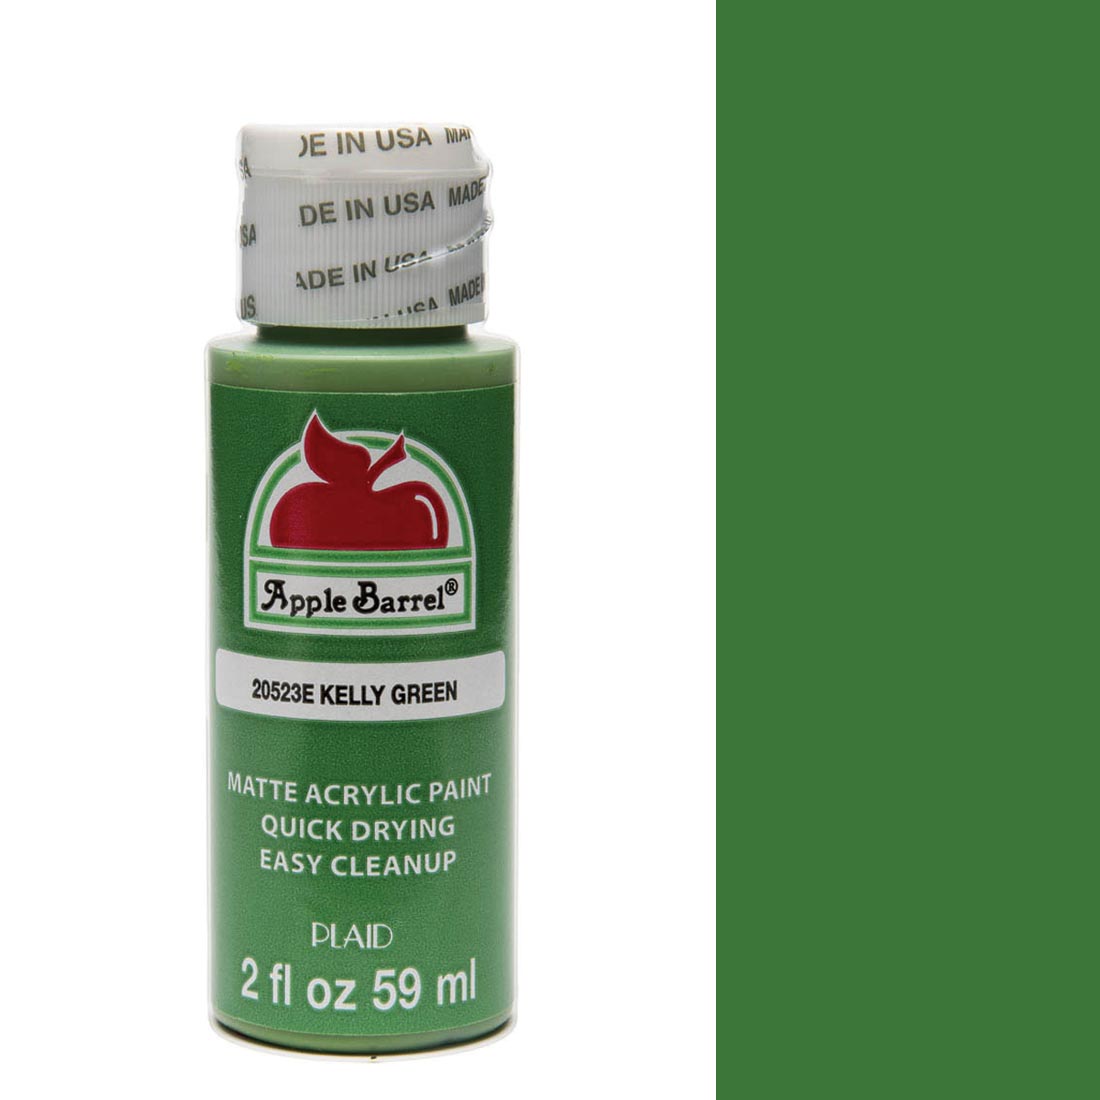 Kelly Green Apple Barrel Acrylic Craft Paint bottle next to its color swatch